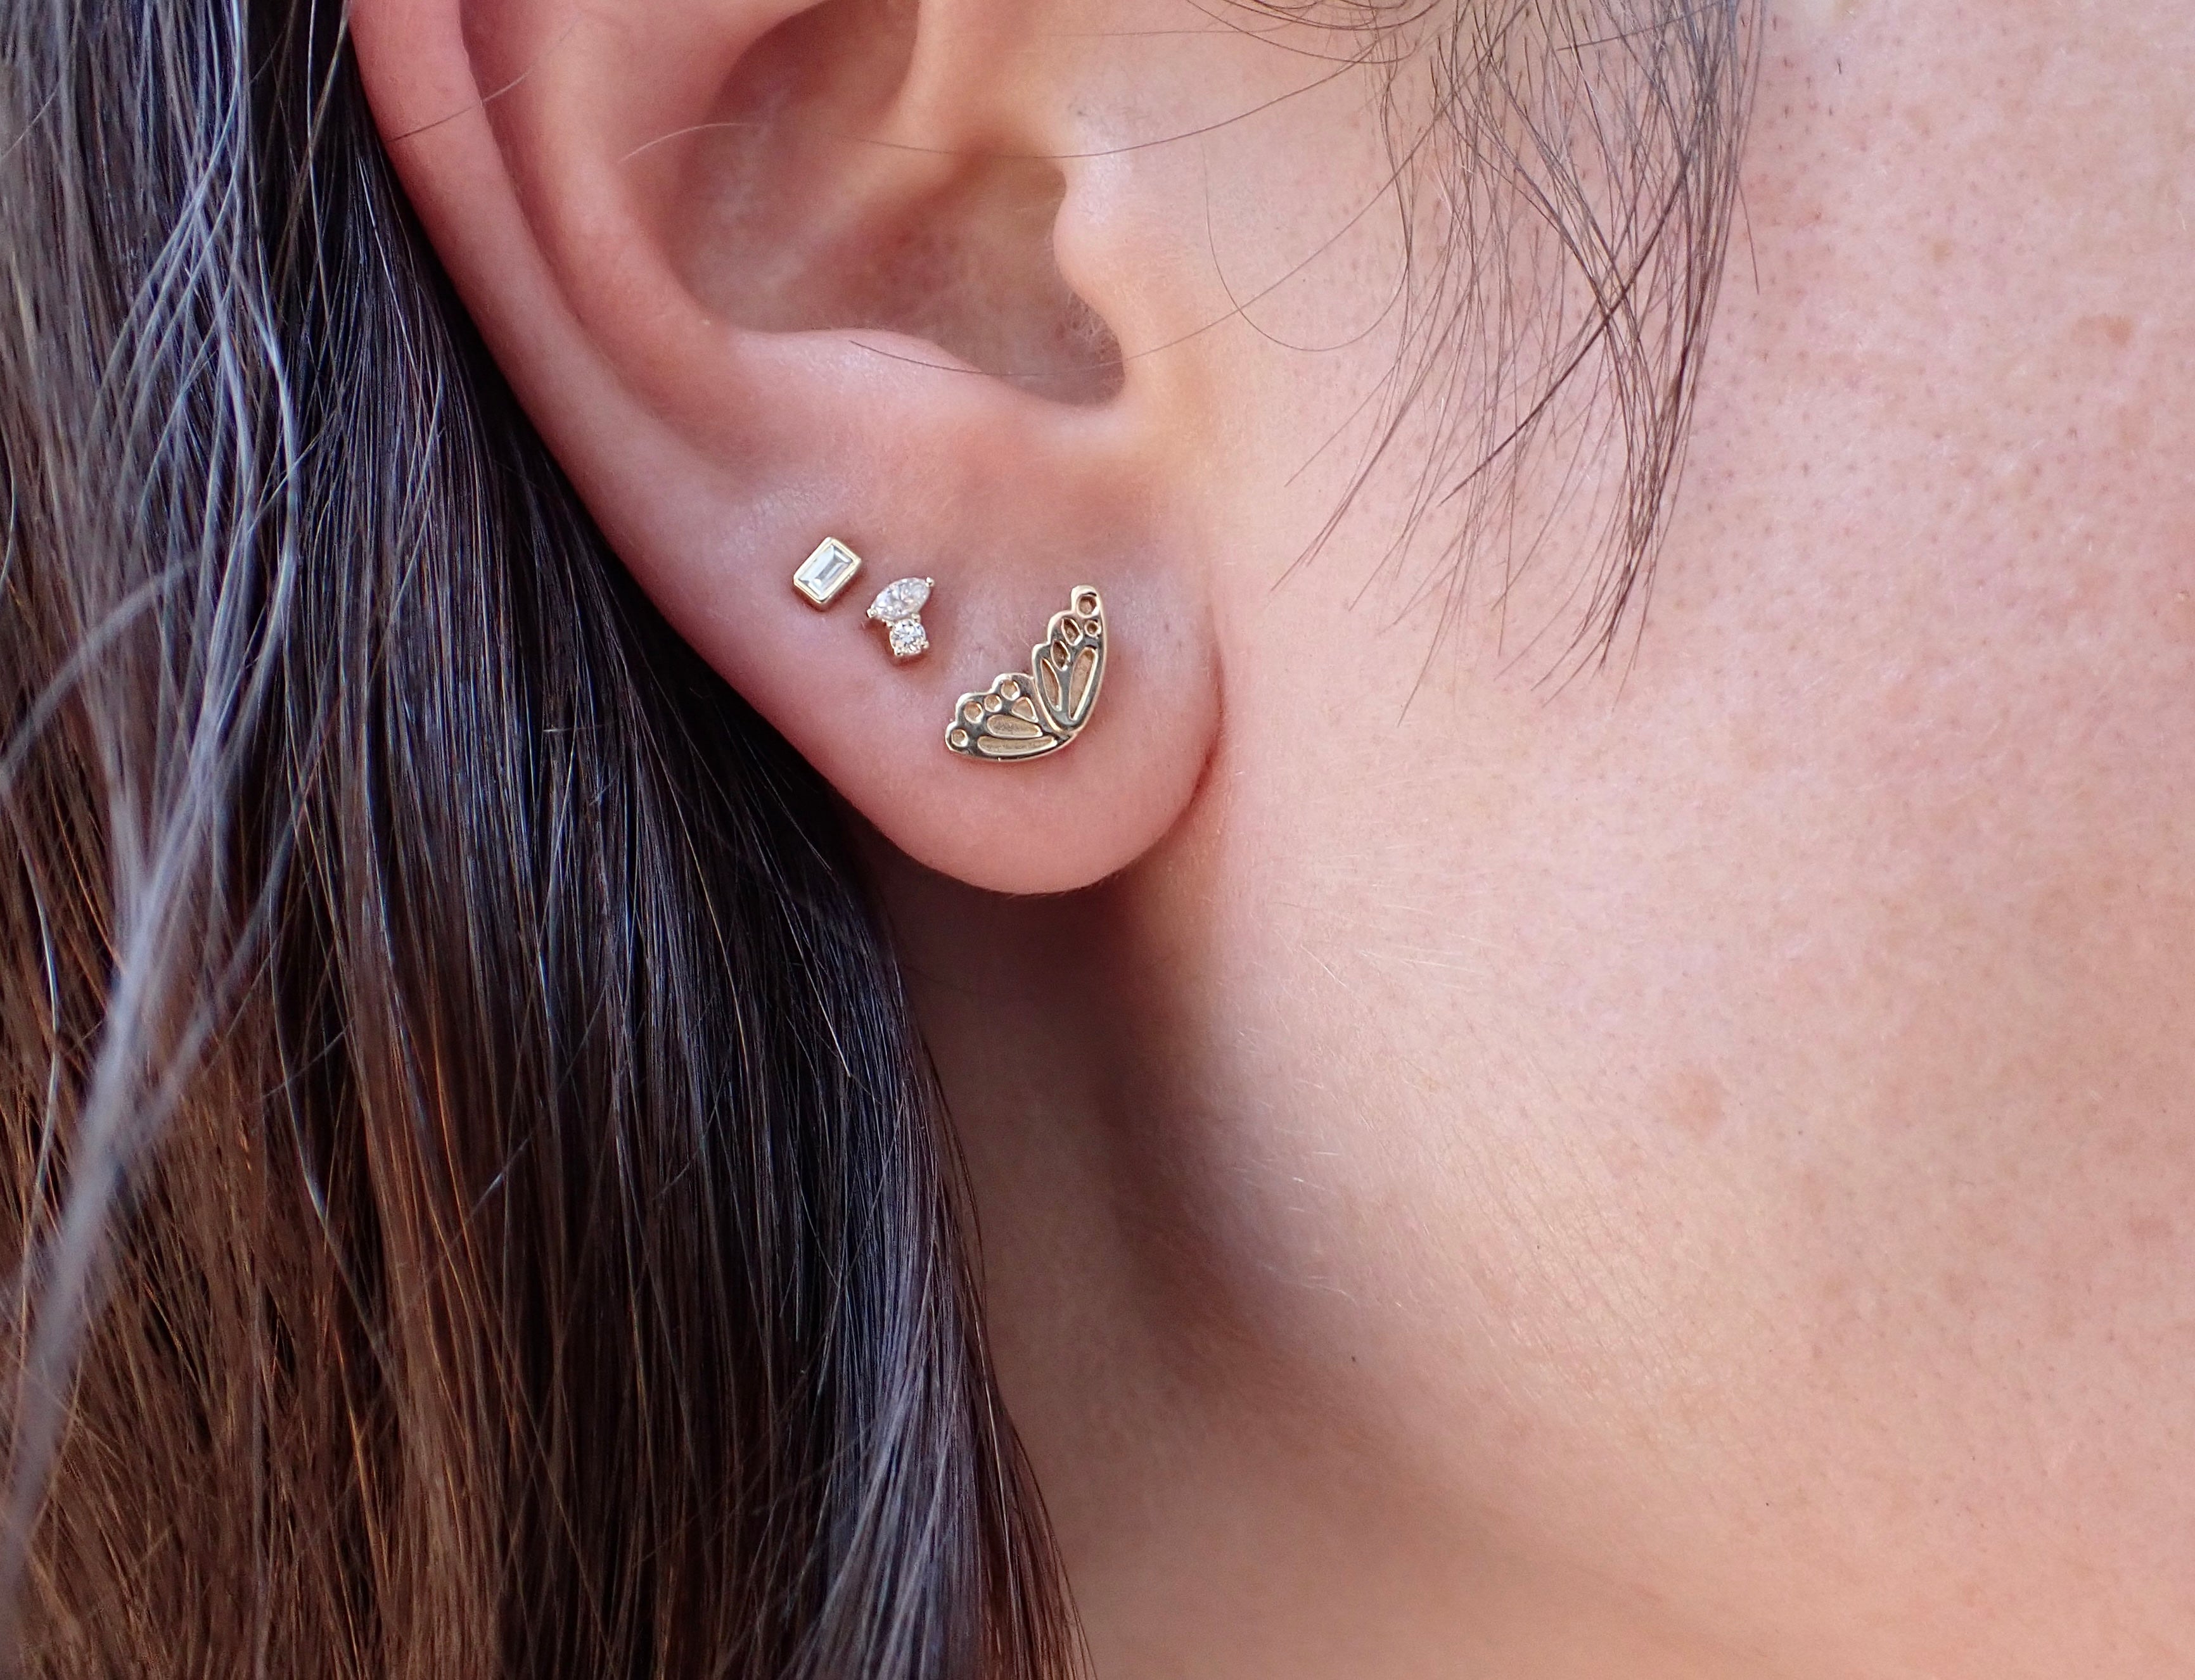 Tiny White Diamond Cluster Studs, Solid 14k Gold - mossNstone